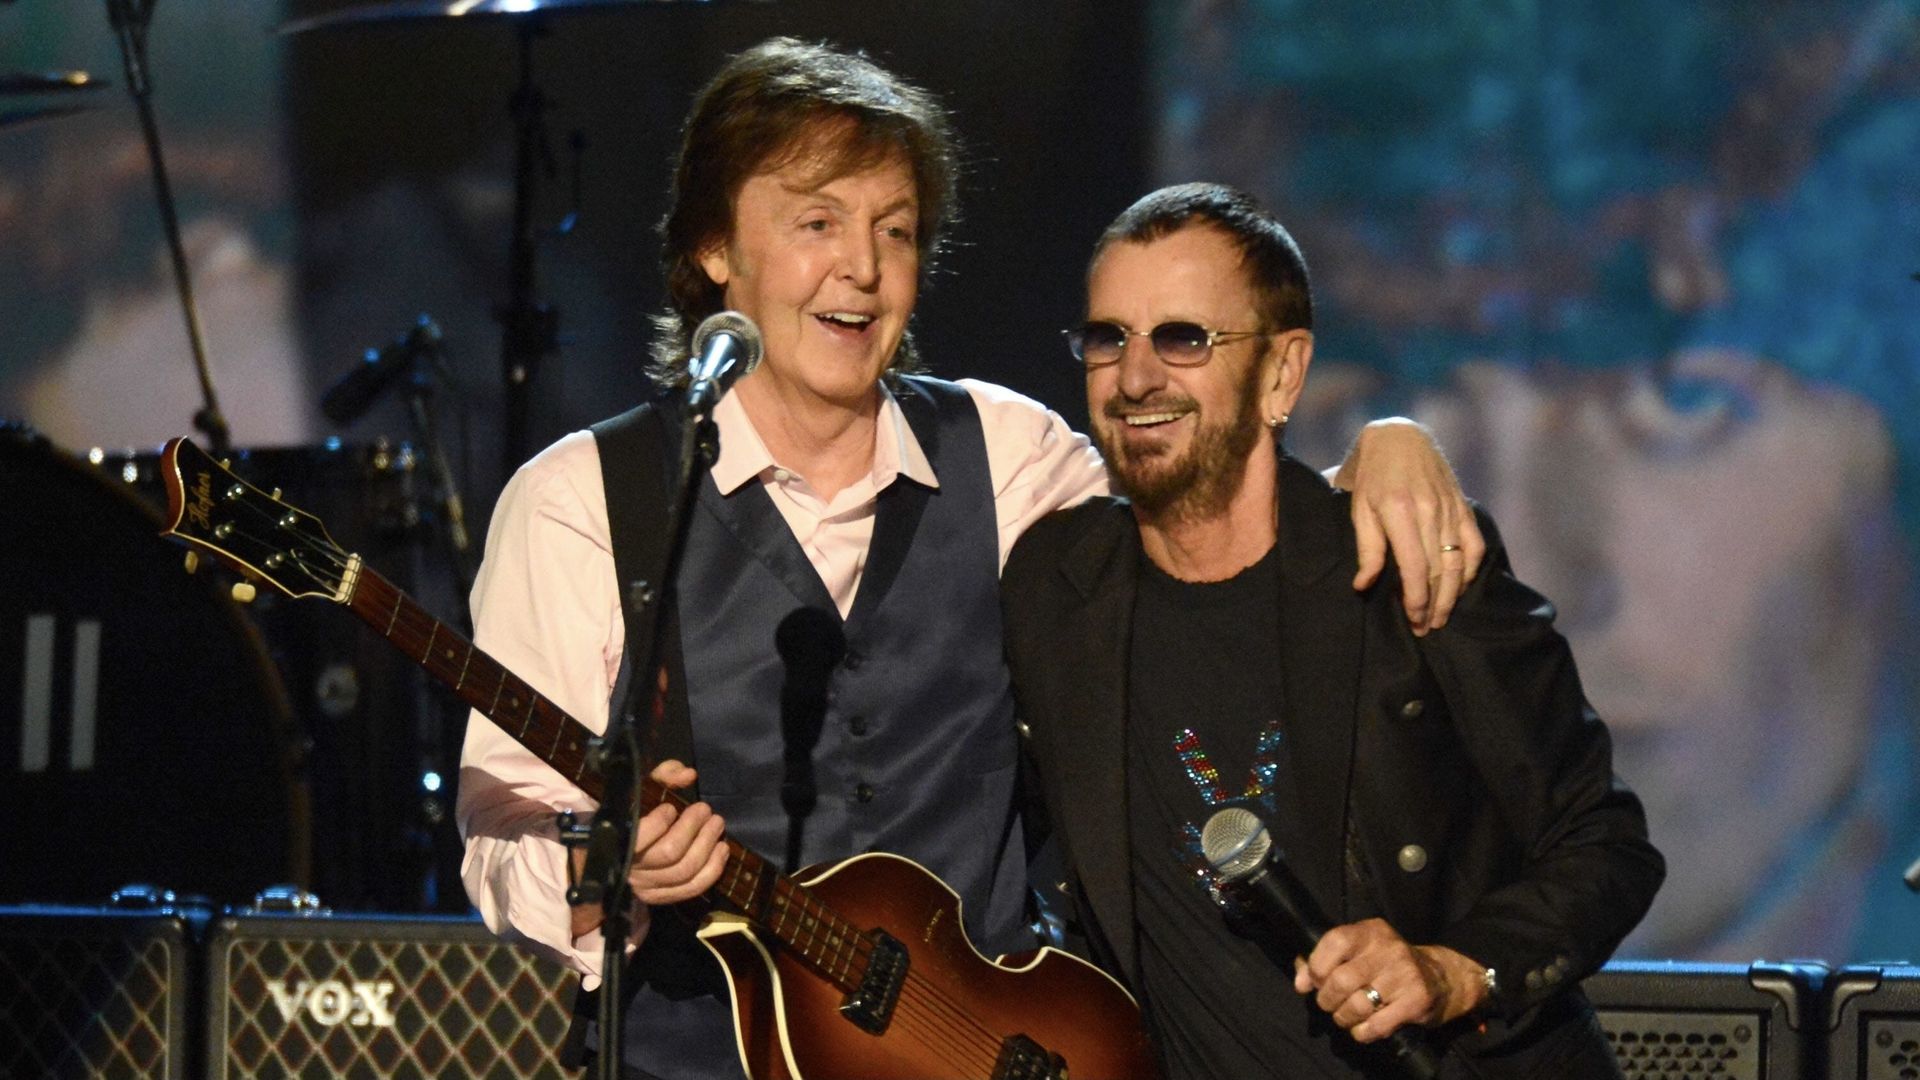 The Night That Changed America: A Grammy Salute to the Beatles background